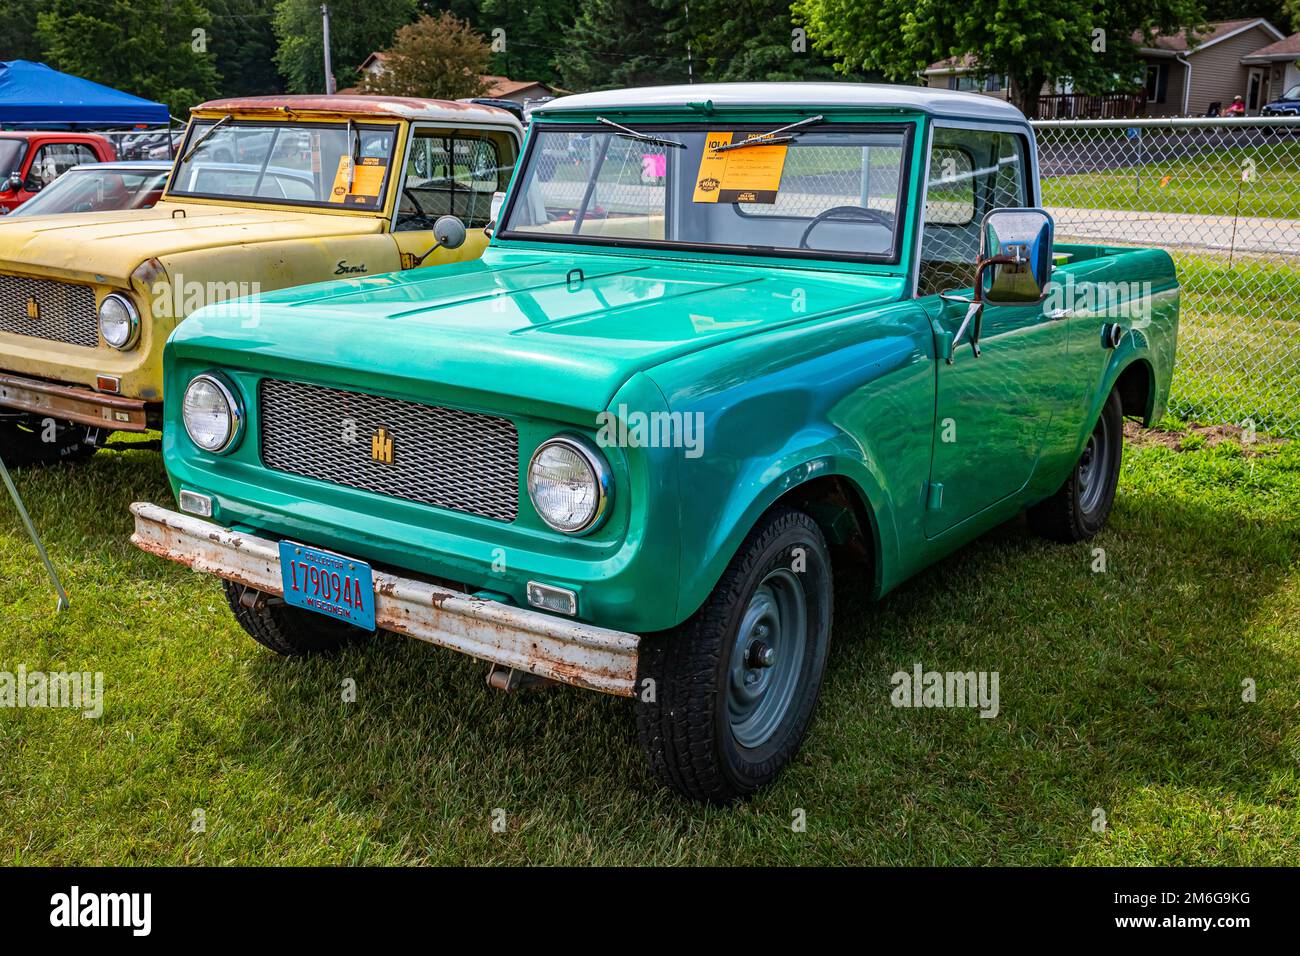 Iola, WI - July 07, 2022: High perspective front corner view of a 1961 International Harvester Scout 80 Pickup at a local car show. Stock Photo